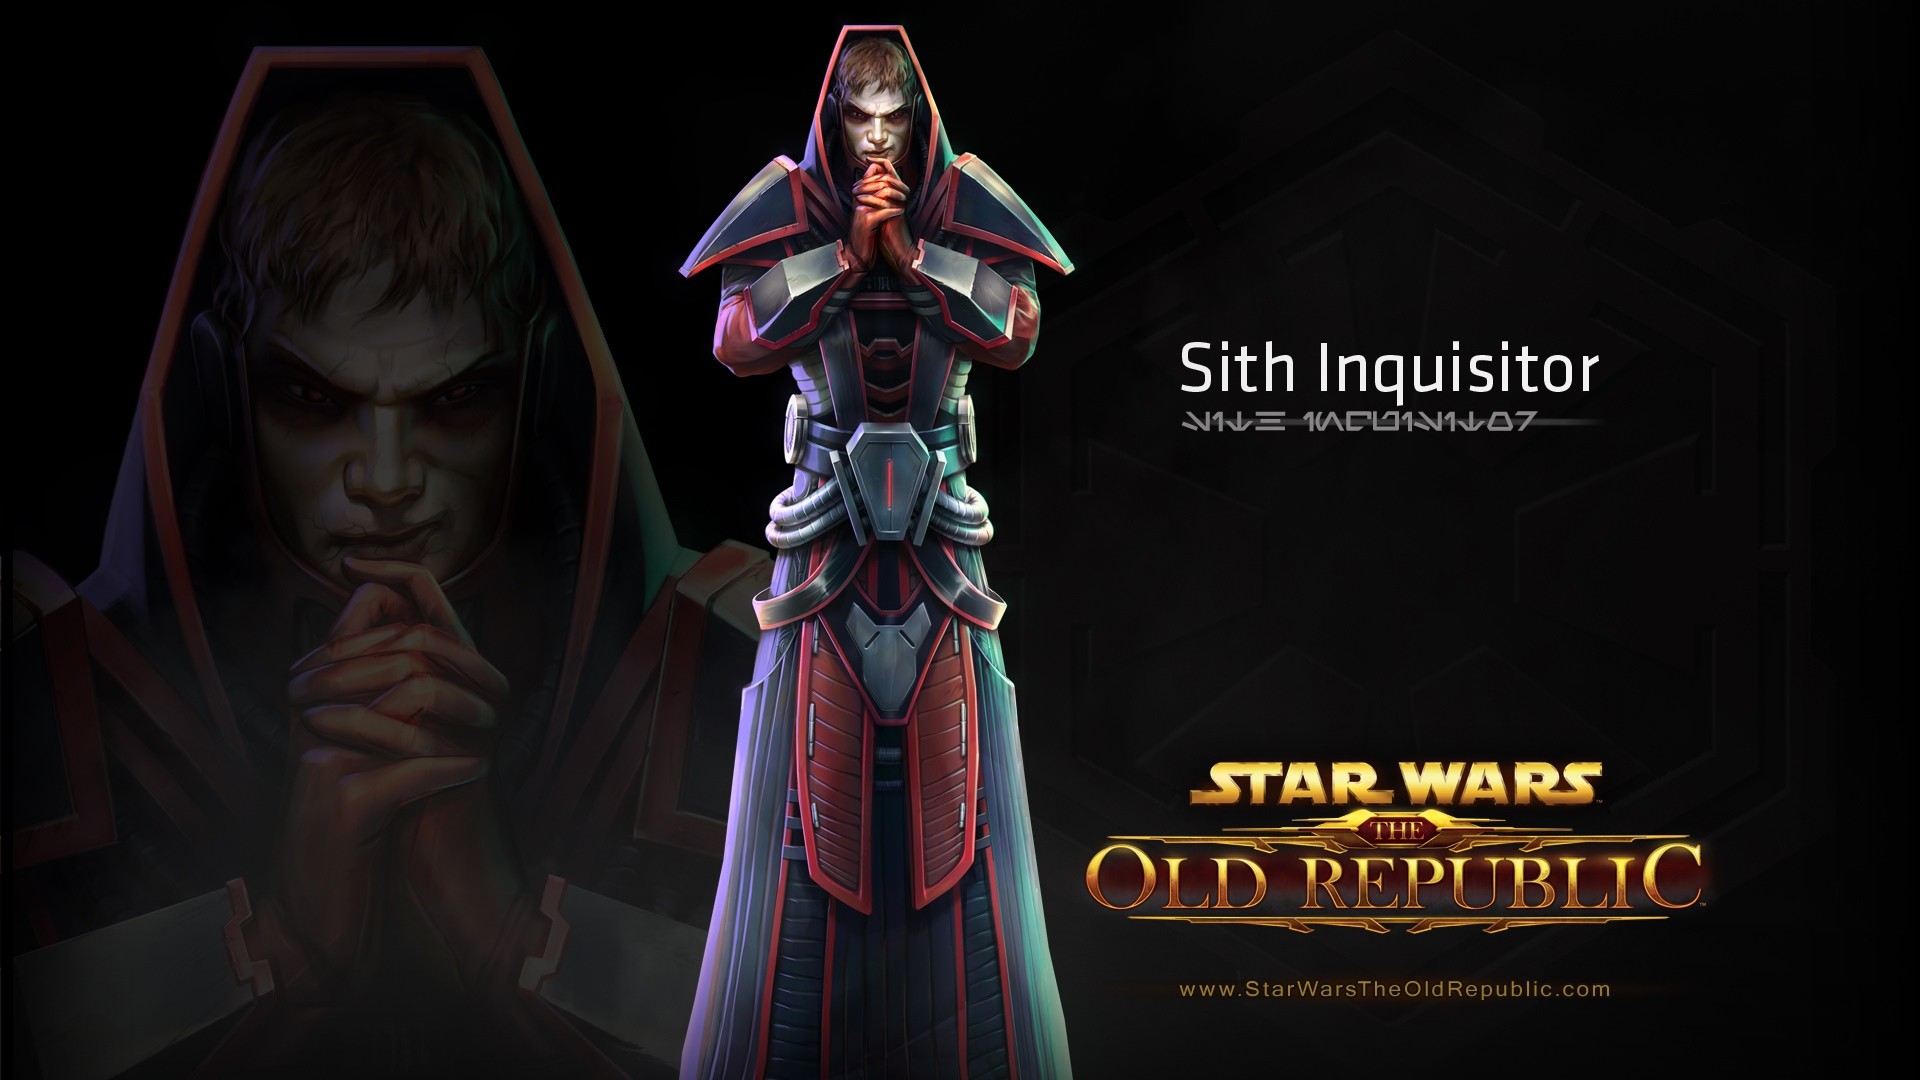 Star wars the old republic, sith inquisitor, character